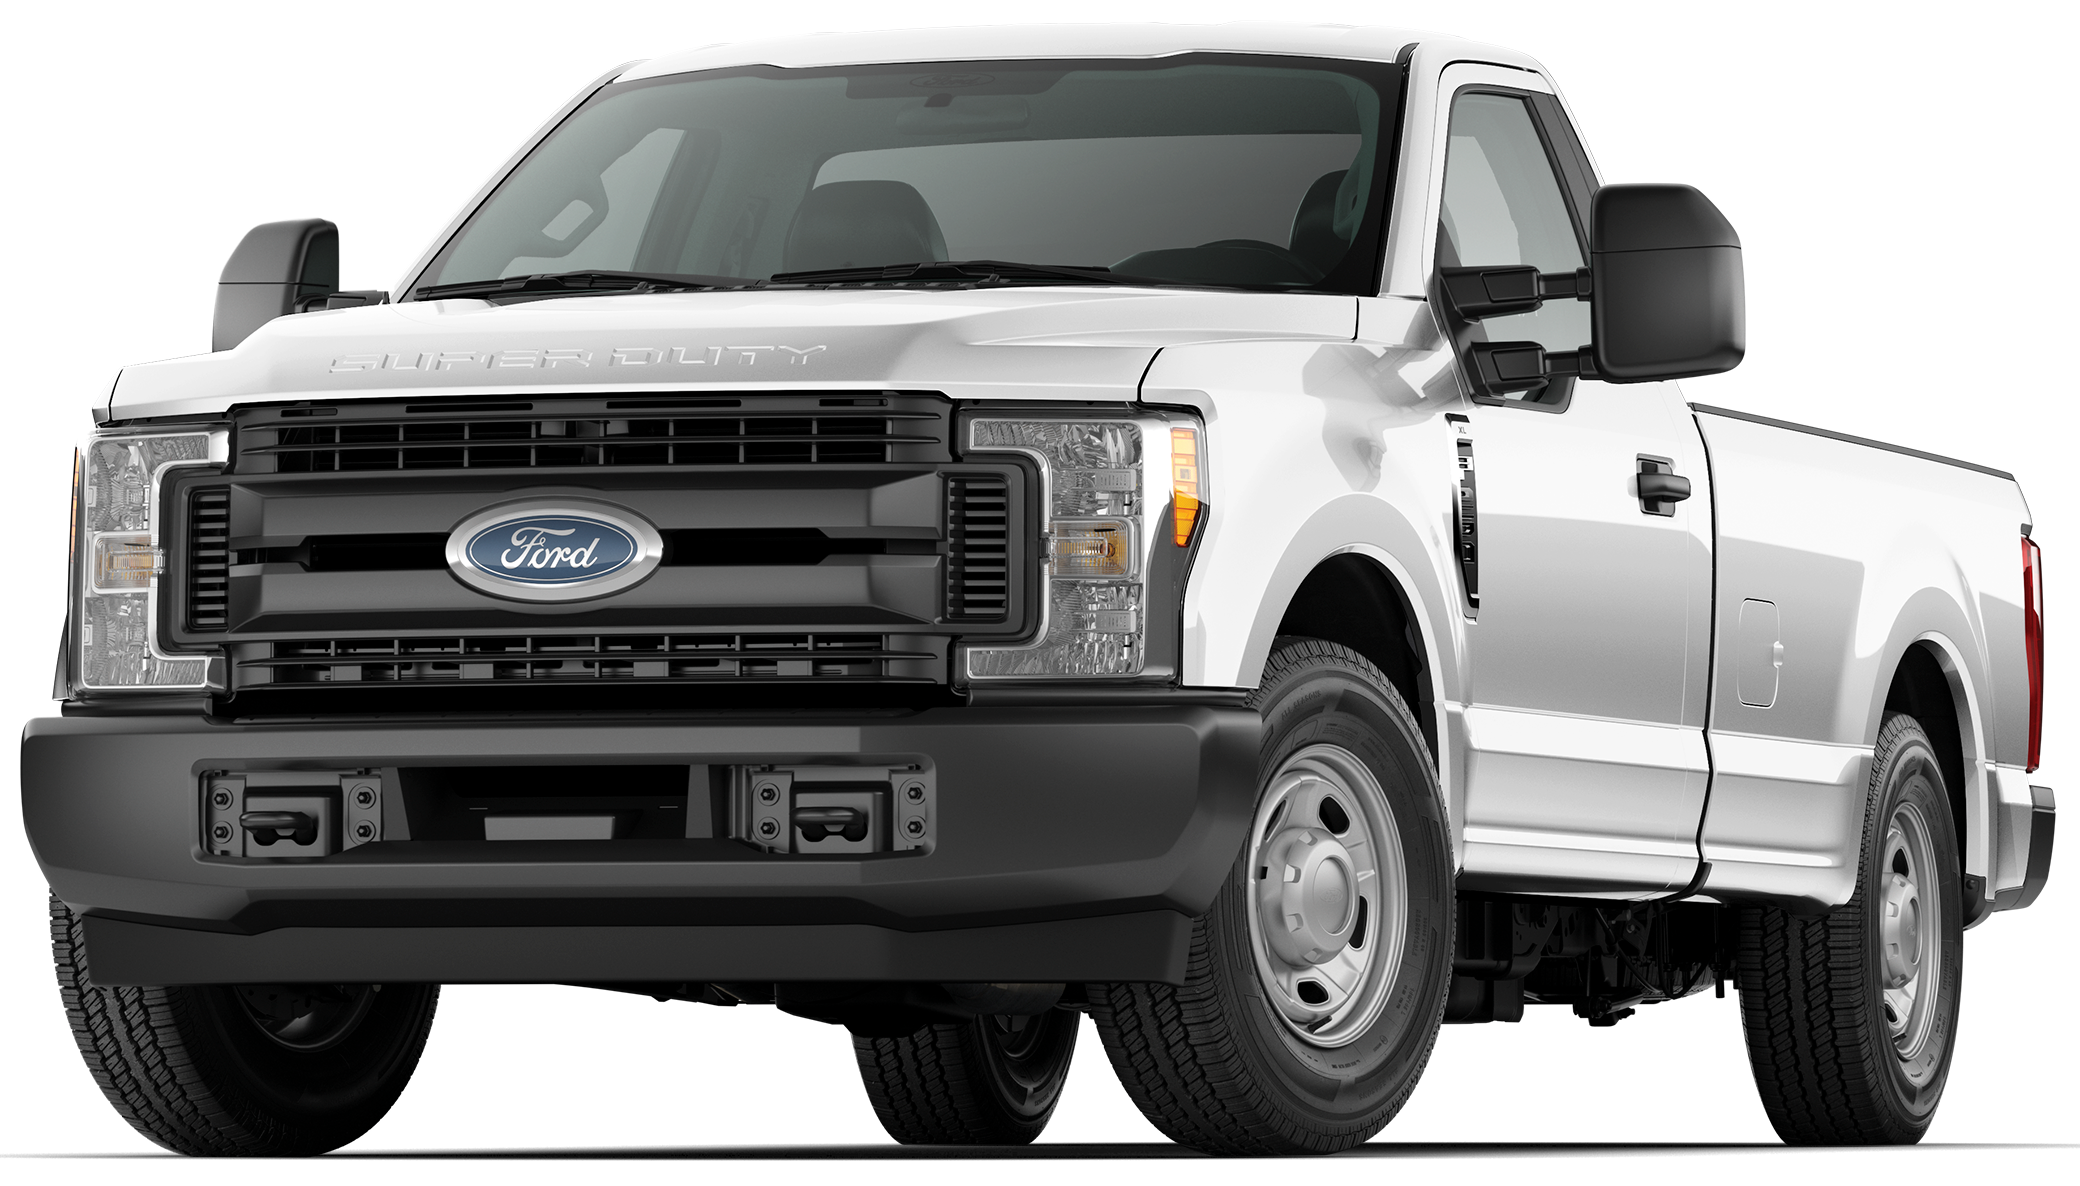 2019 Ford F 150 Xl Rwd Truck For Sale Jacksonville Fl 193196